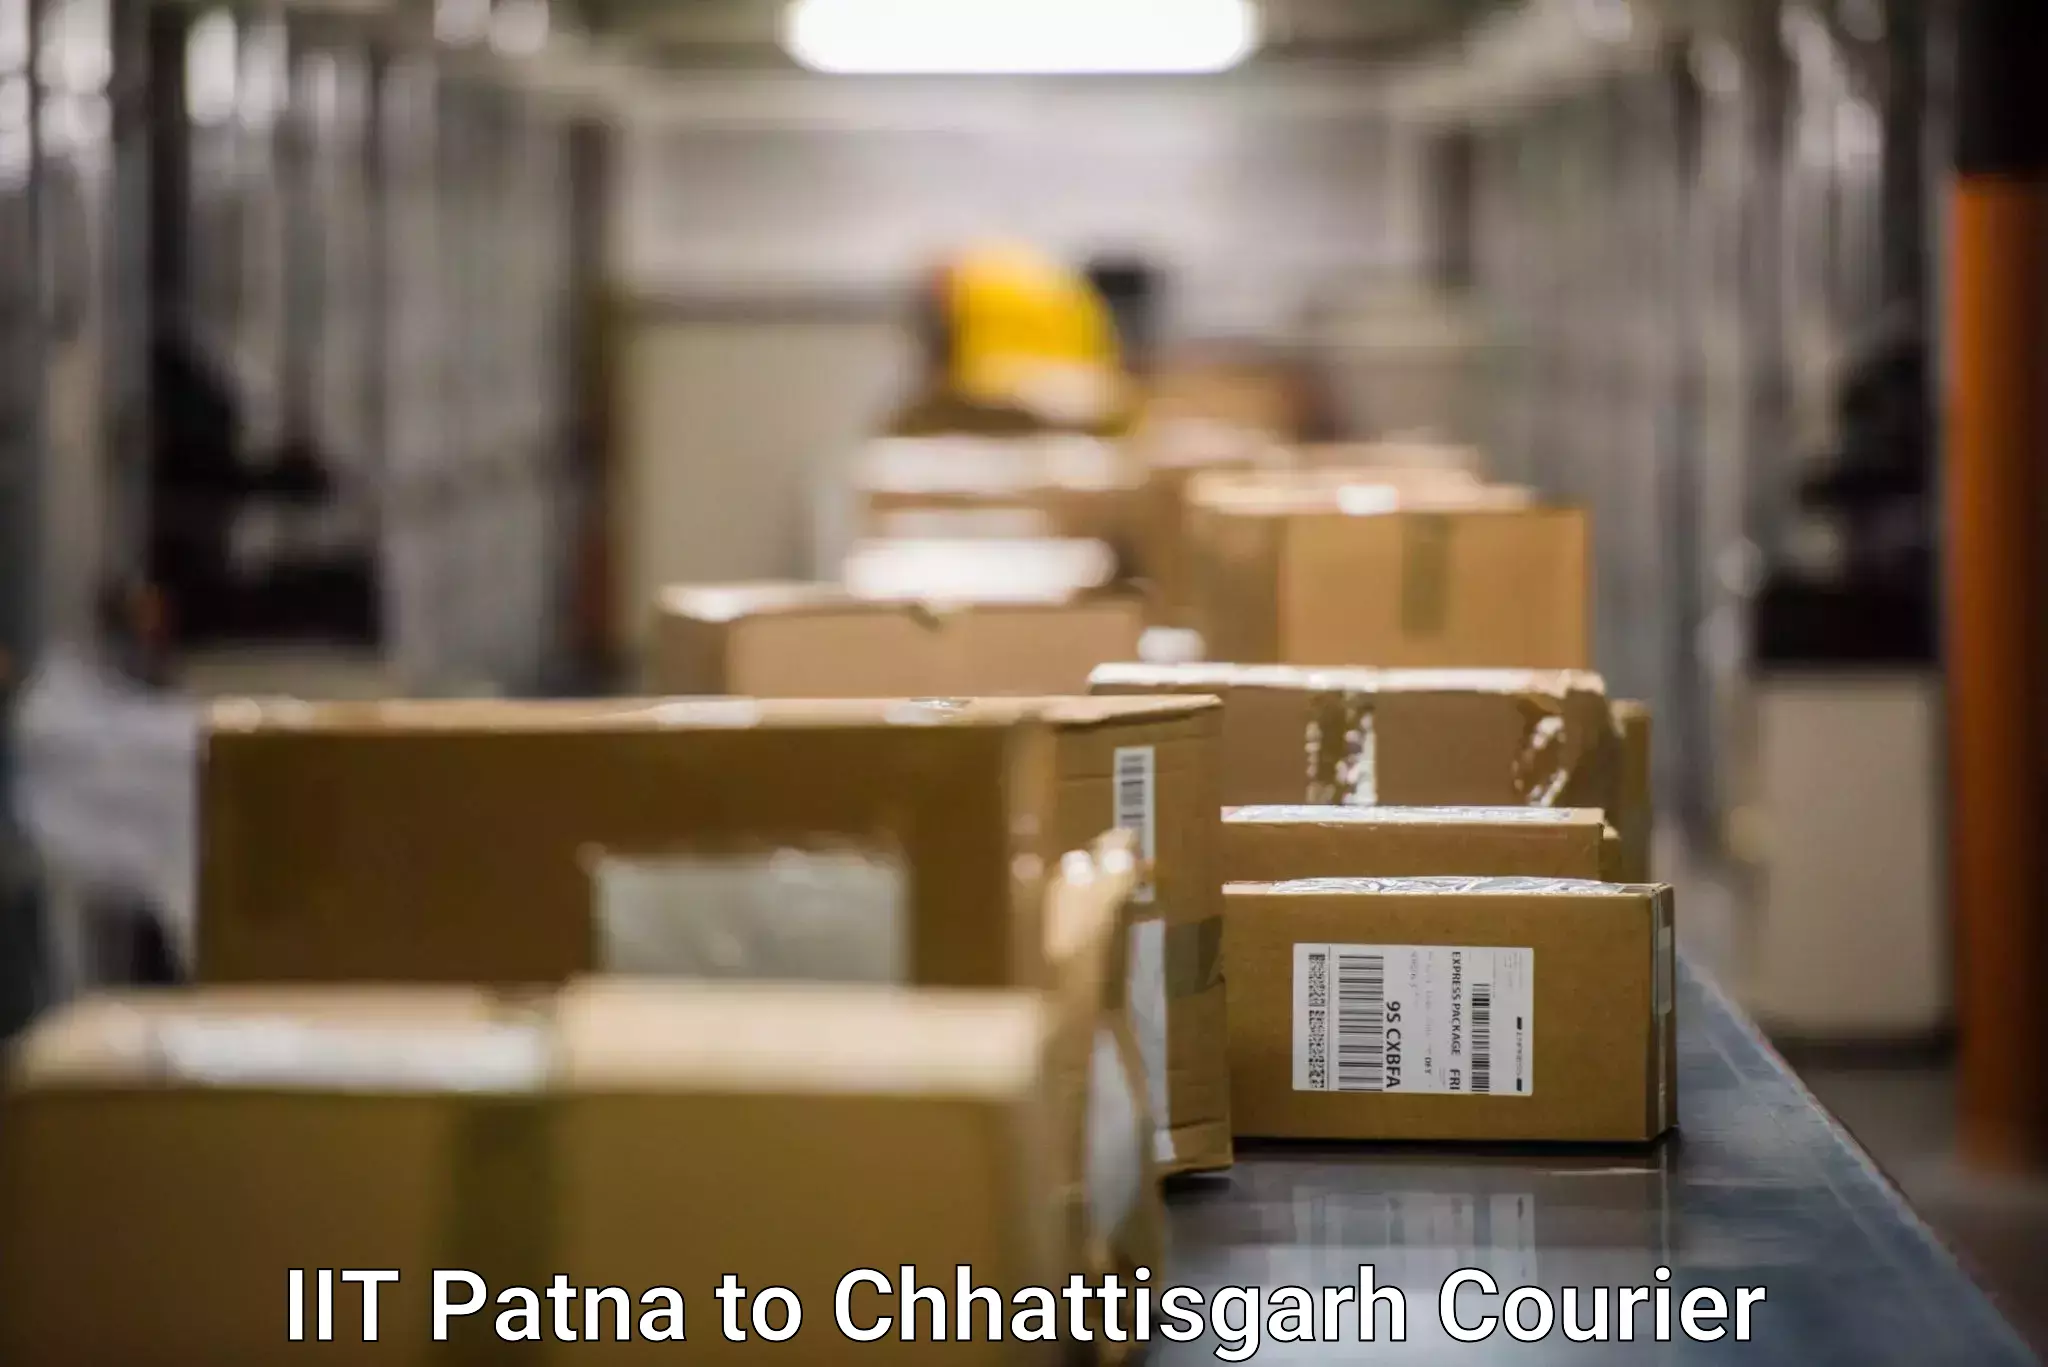 Package delivery network IIT Patna to Chhattisgarh